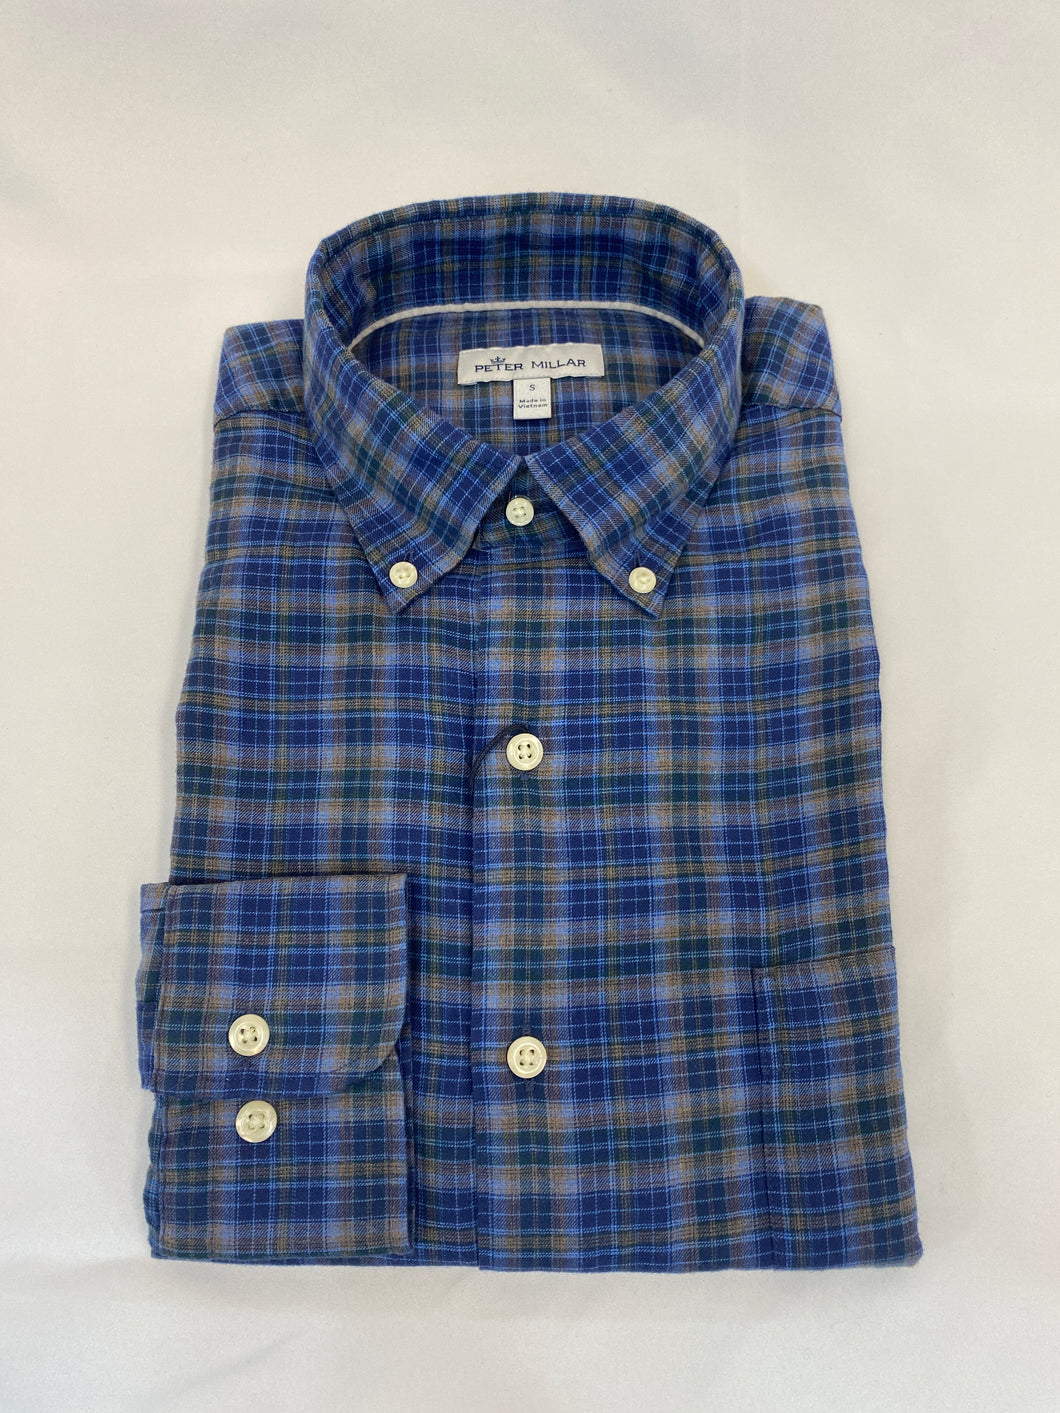 Peter Millar Sport Shirt in Navy/Brown Check Plaid with Button Down Collar